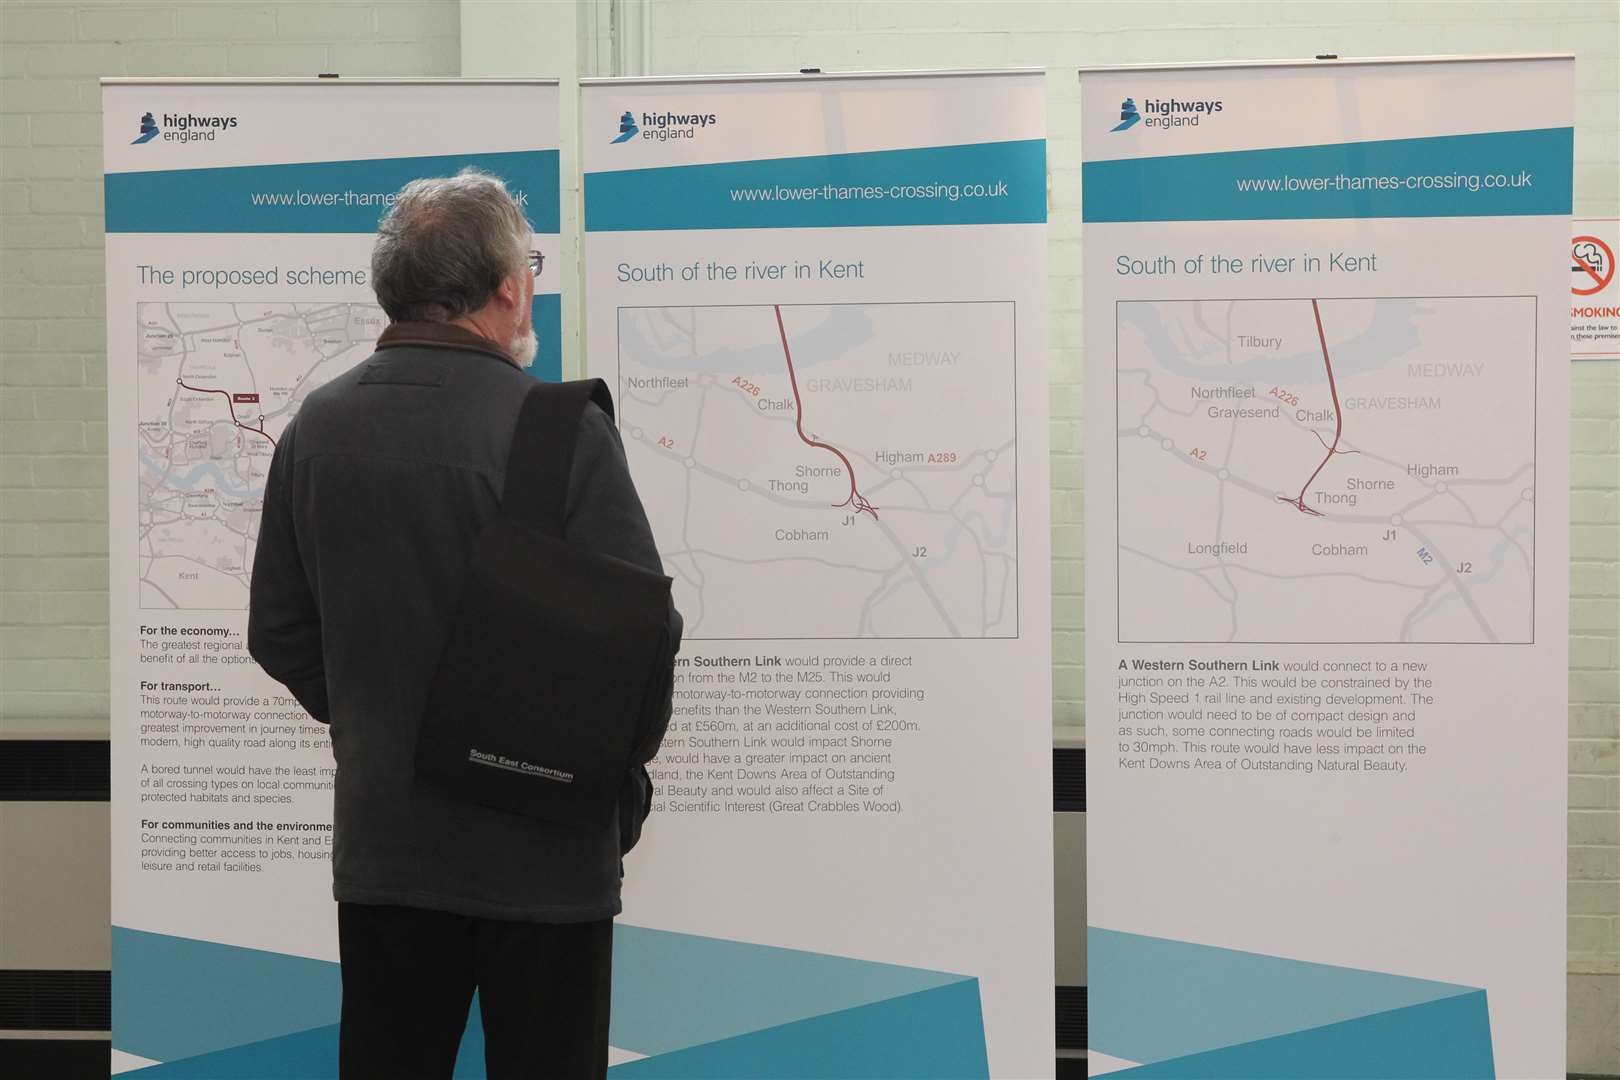 A man looks at the Lower Thames Crossing plans.